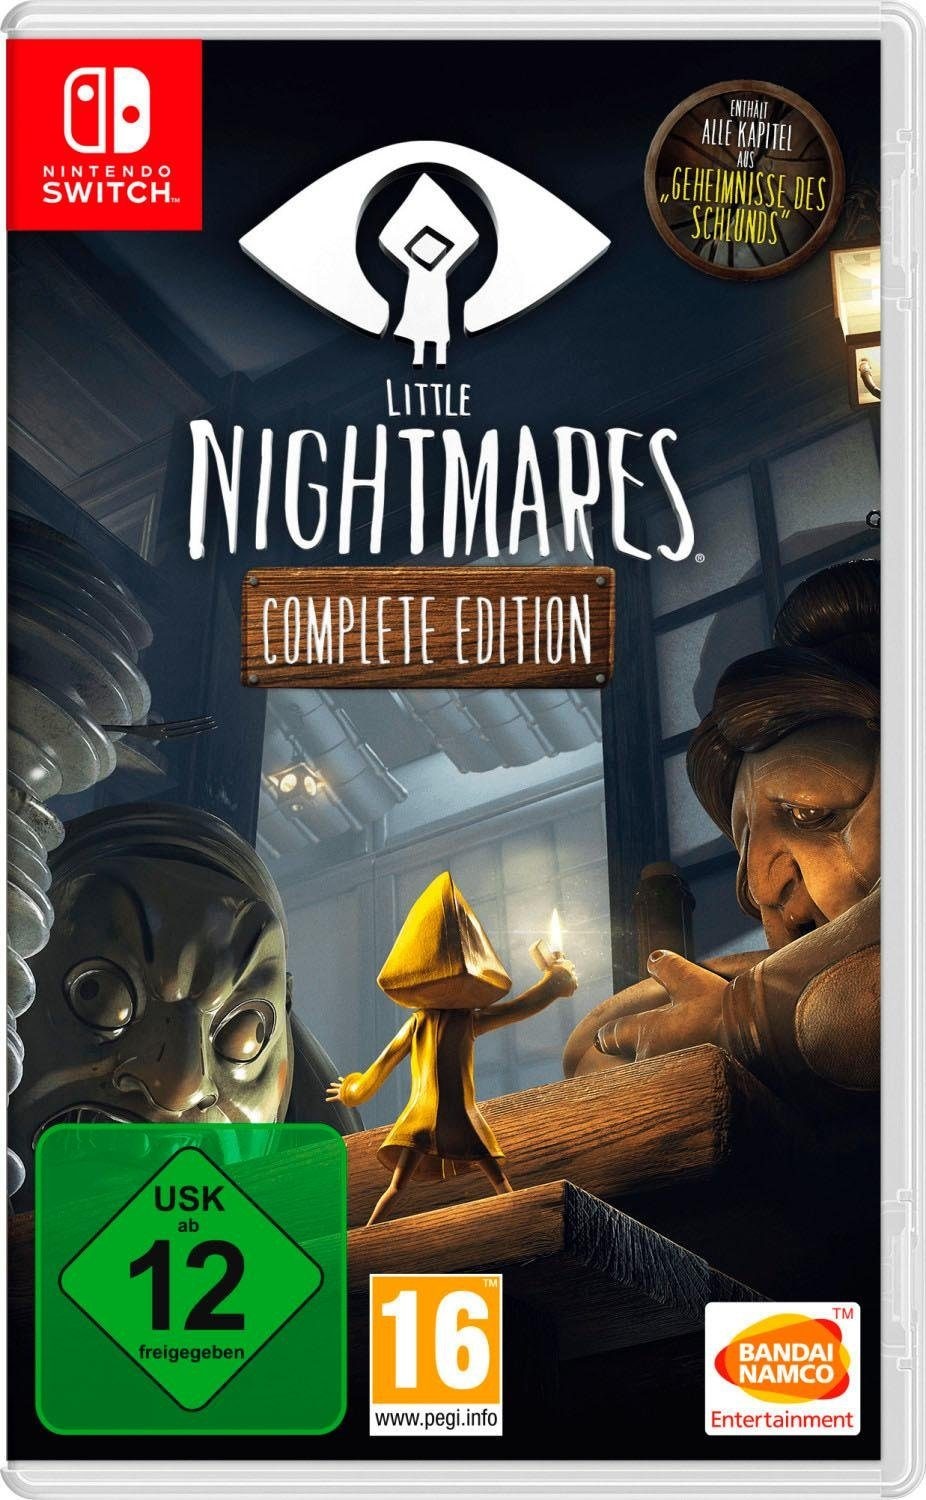 BANDAI NAMCO Spielesoftware »LITTLE NIGHTMARES COMPLETE EDITION«, Nintendo Switch, Software Pyramide